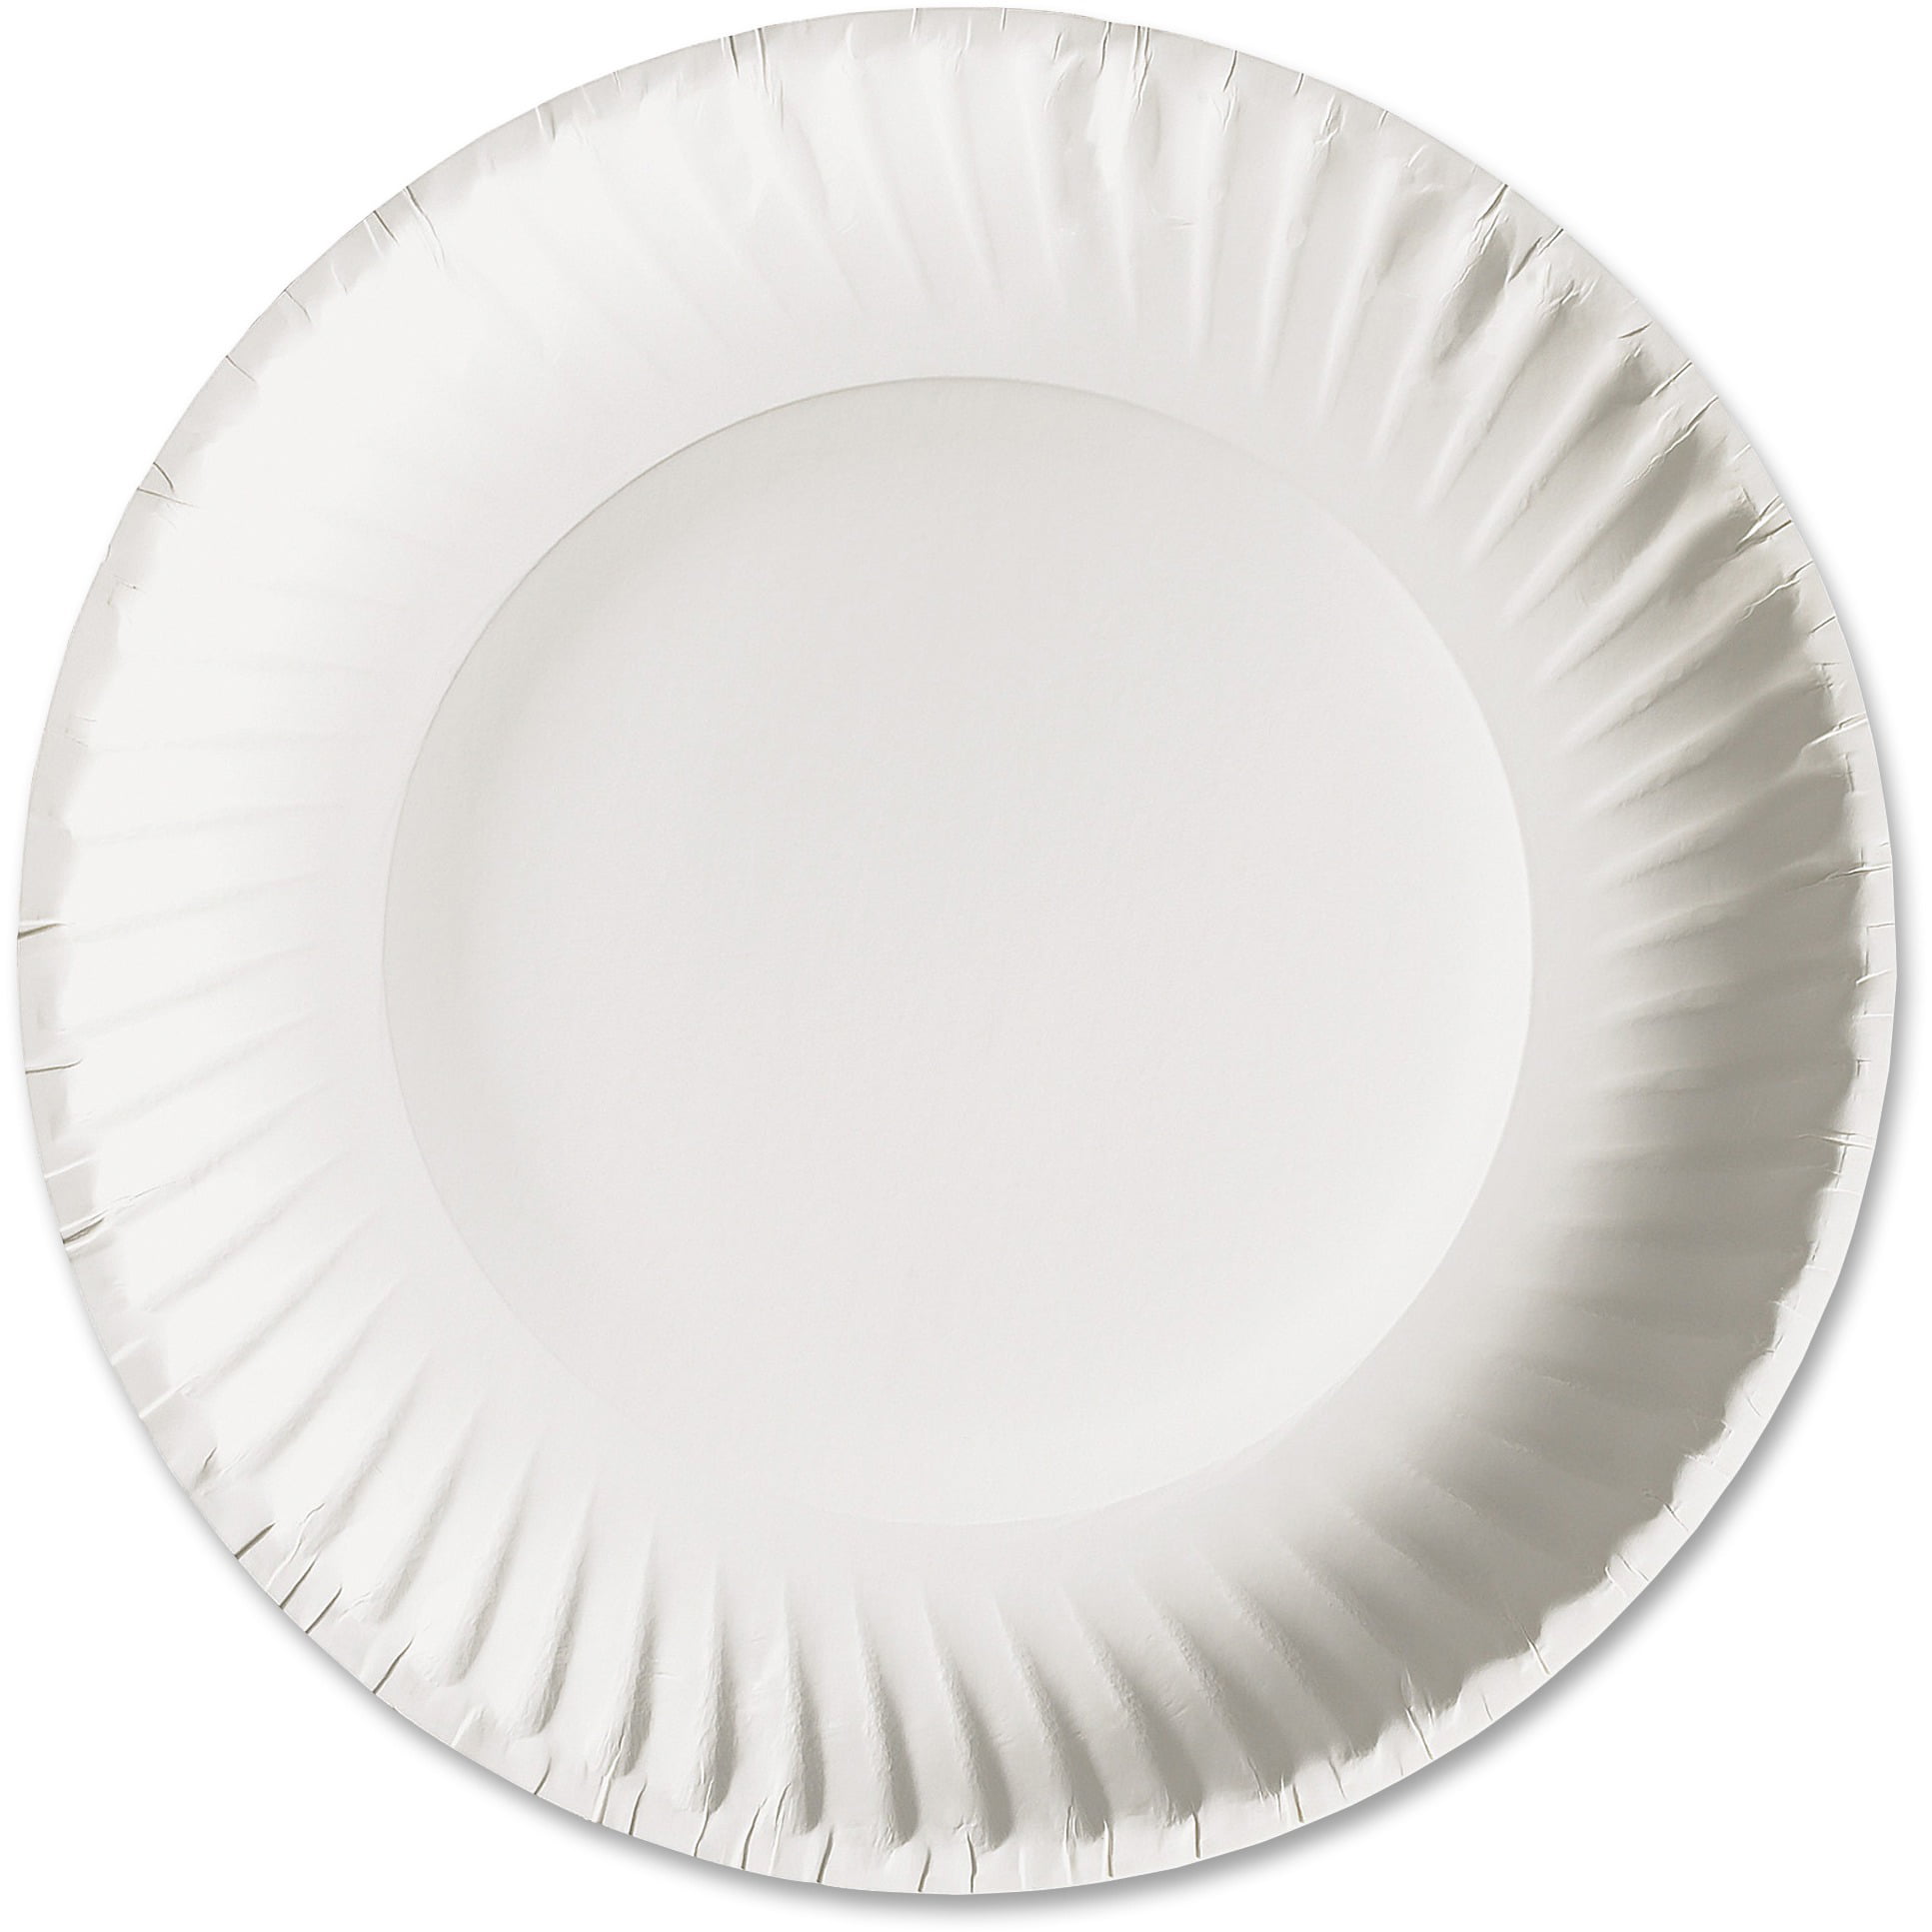 Buy Paper Plate | UP TO 56% OFF